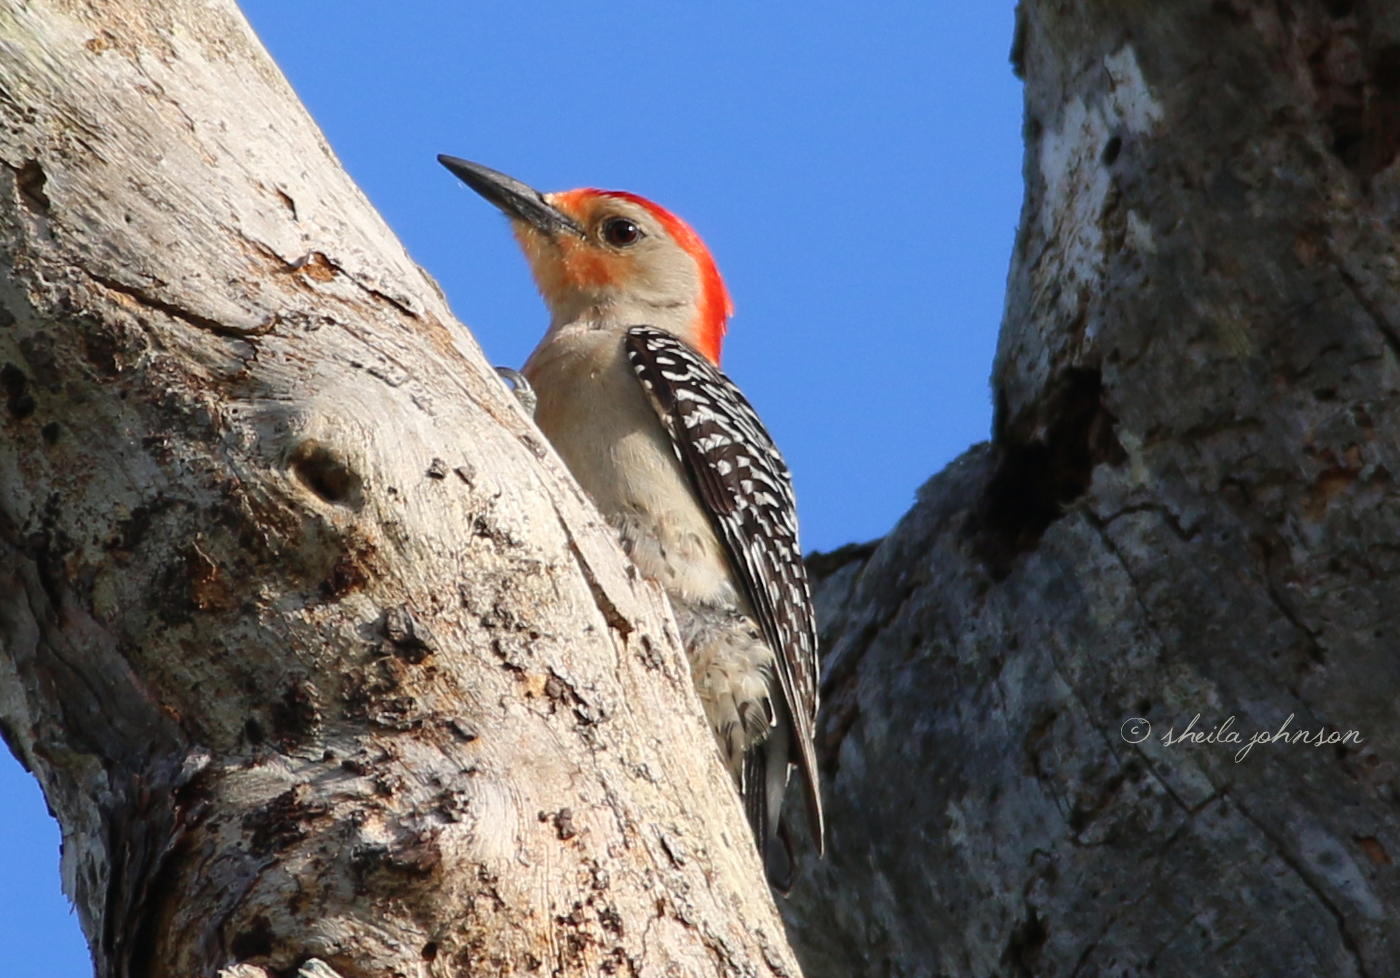 This Little Guy Is Taking A Break From Helping His Mate Incubate Their Egglets. Red-Bellied Woodpeckers Pairs Share This Responsibility, As Many Breeds Of Birds Do.